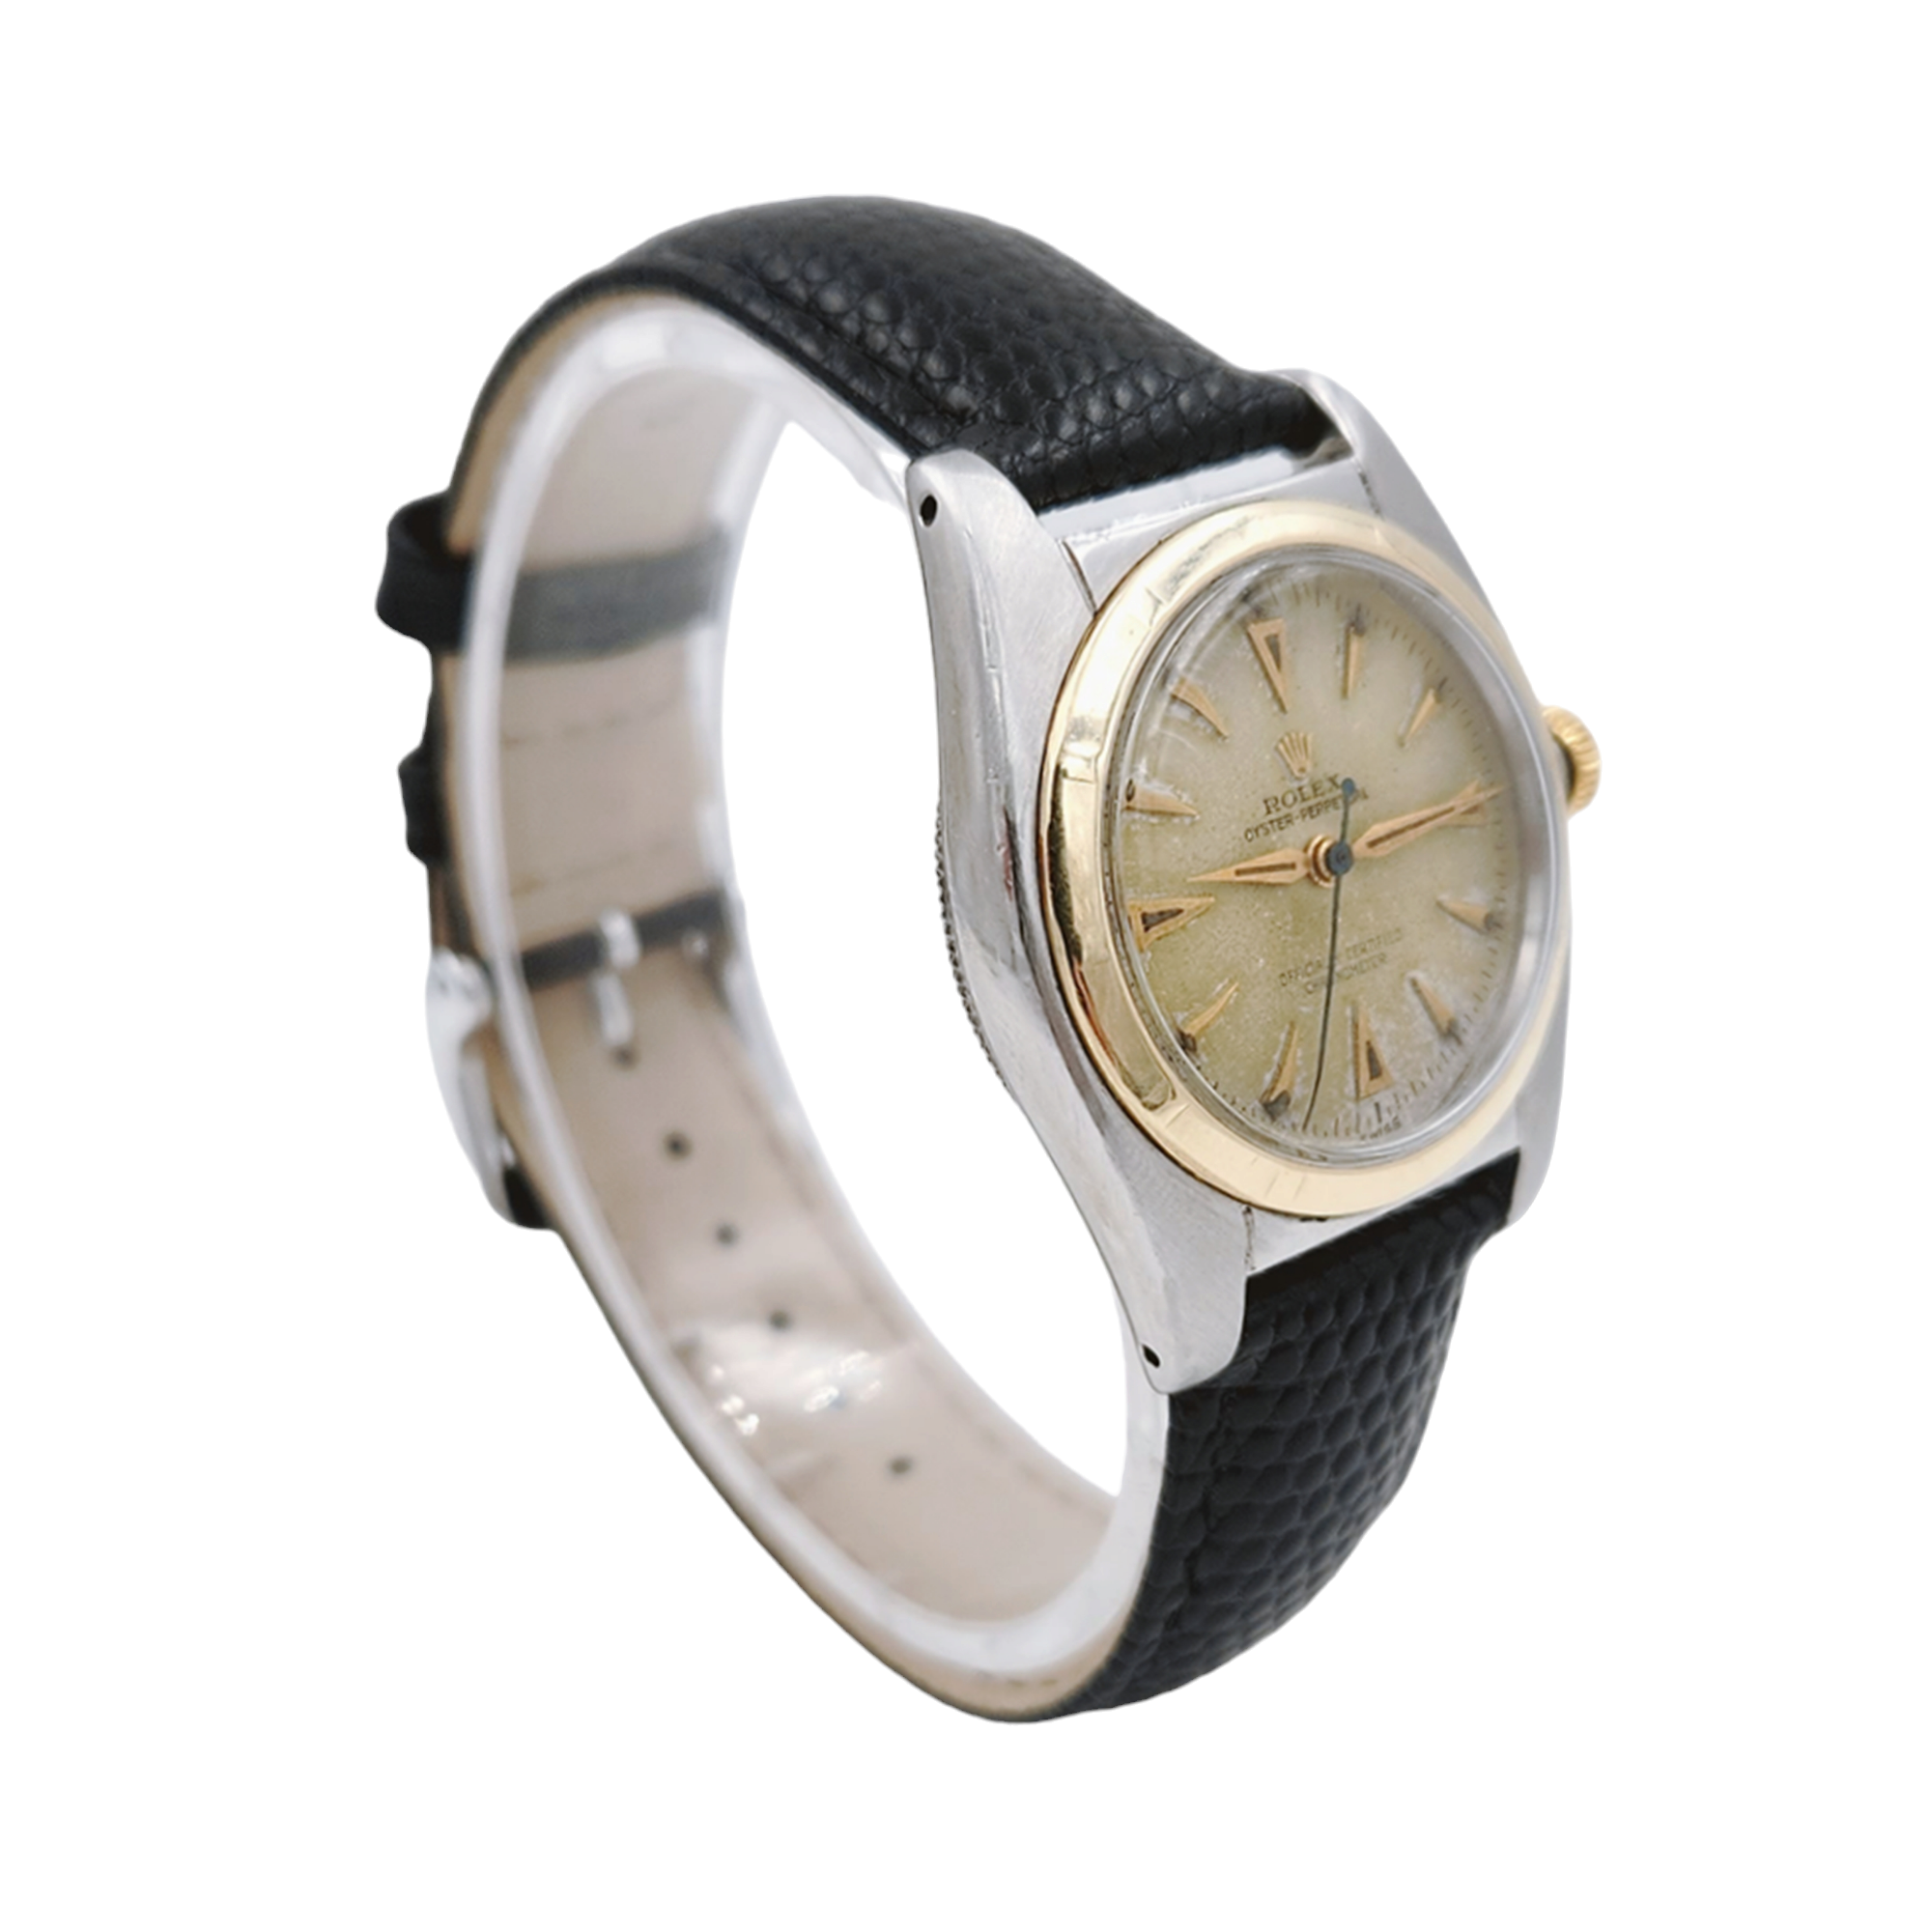 1957 Men's Rolex 32mm Bubbleback Vintage Oyster Perpetual Two Tone Watch with Black Leather Strap and Gold Dial. (Pre-Owned 5011)